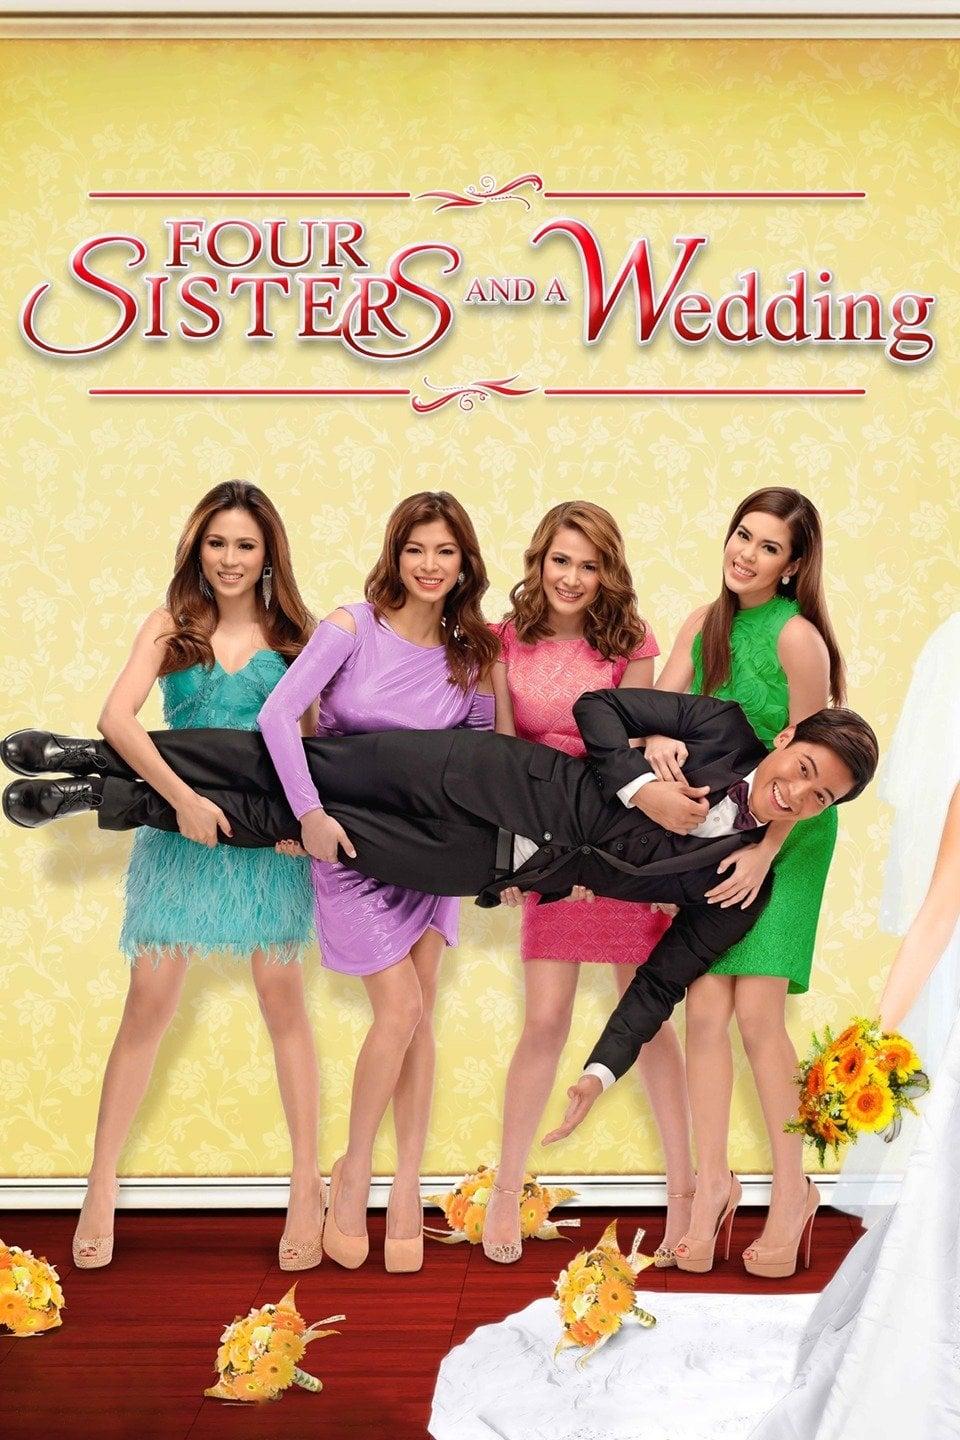 Four Sisters and a Wedding poster